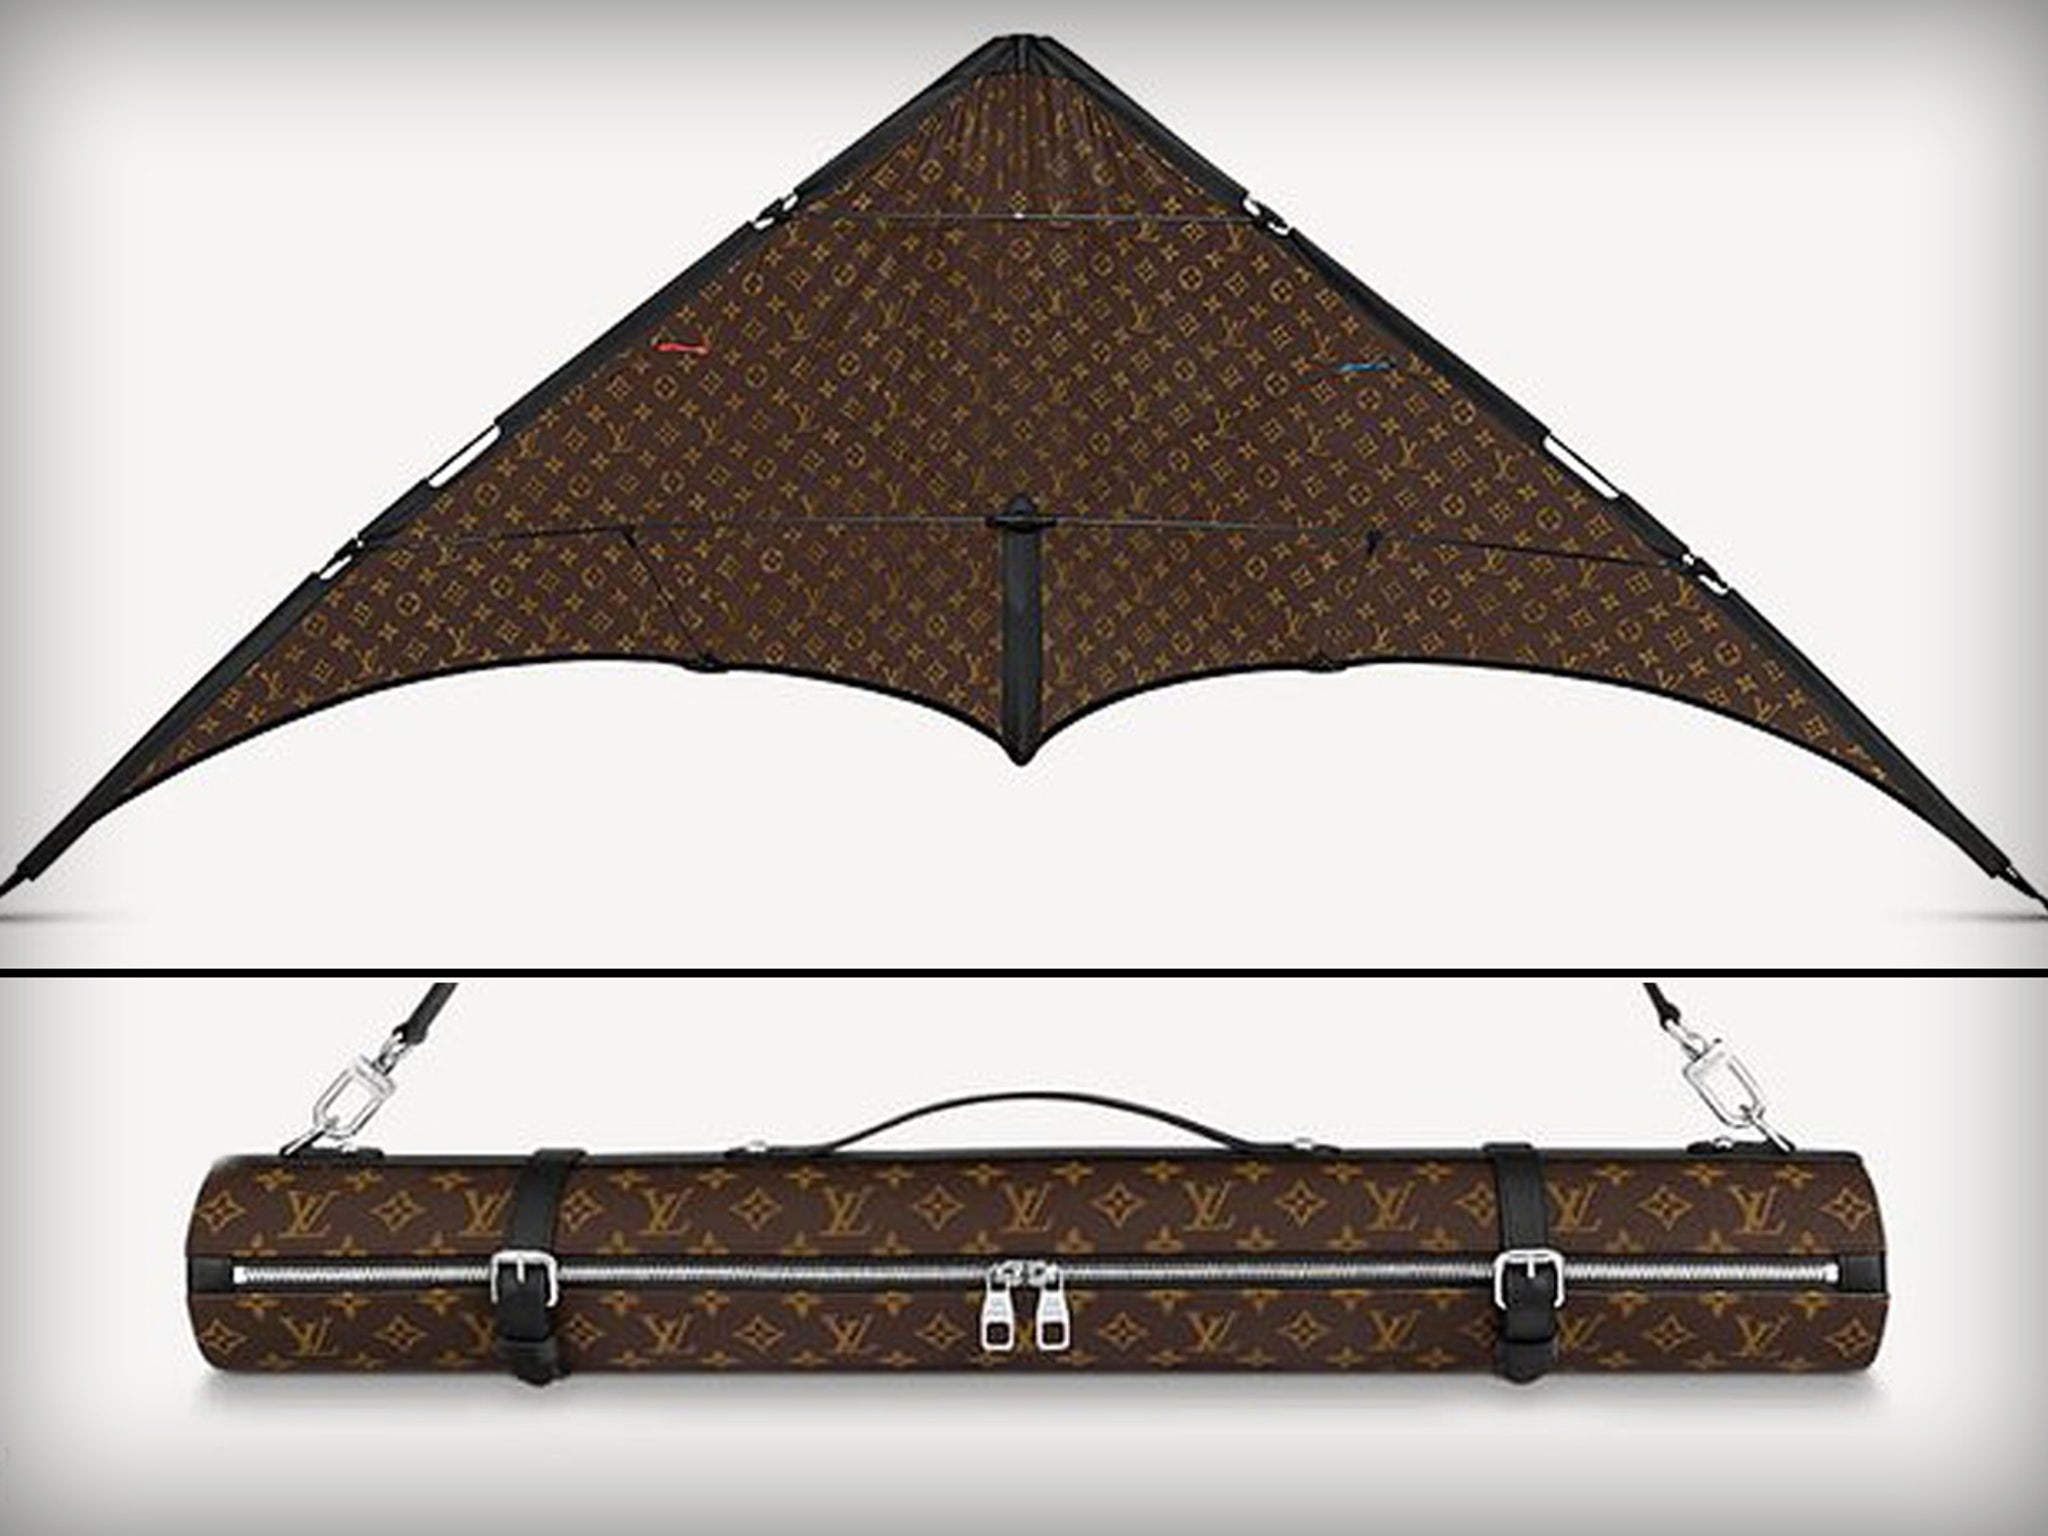 Louis Vuitton Has People Divided On $10,400 Kite